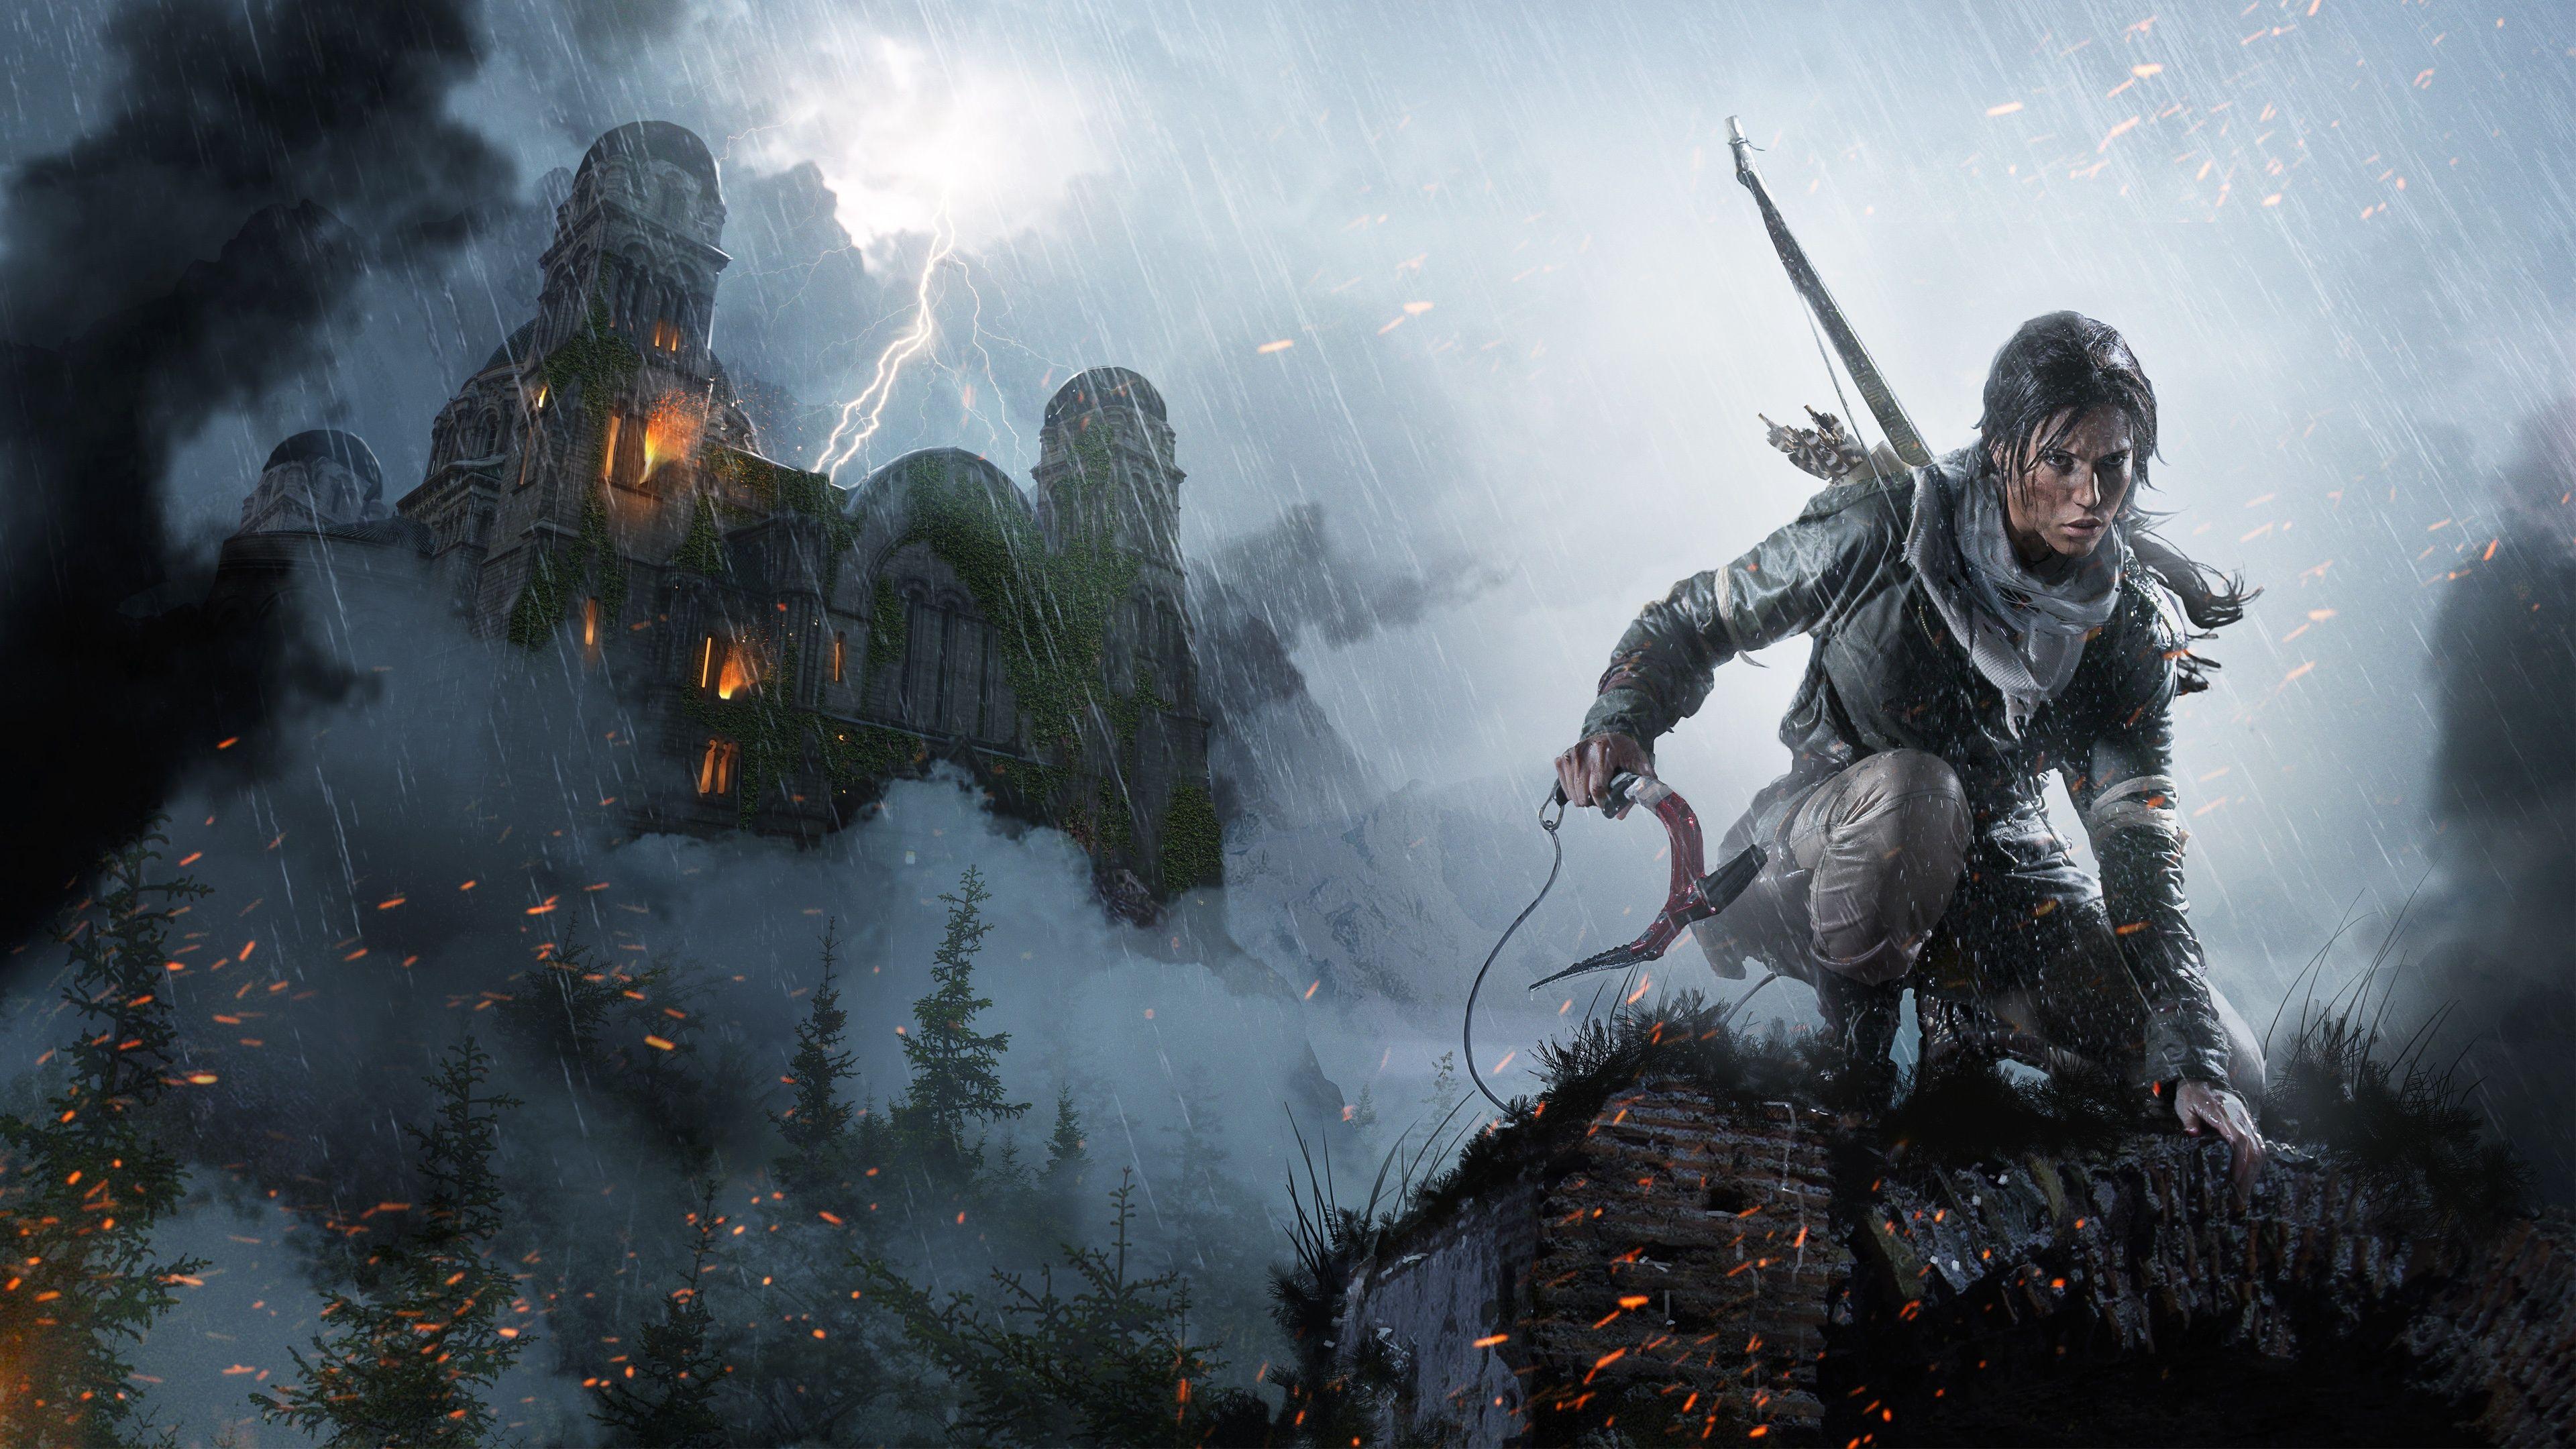 Rise of the Tomb Raider 4K, 1080p and 720p Ultra HD Wallpapers